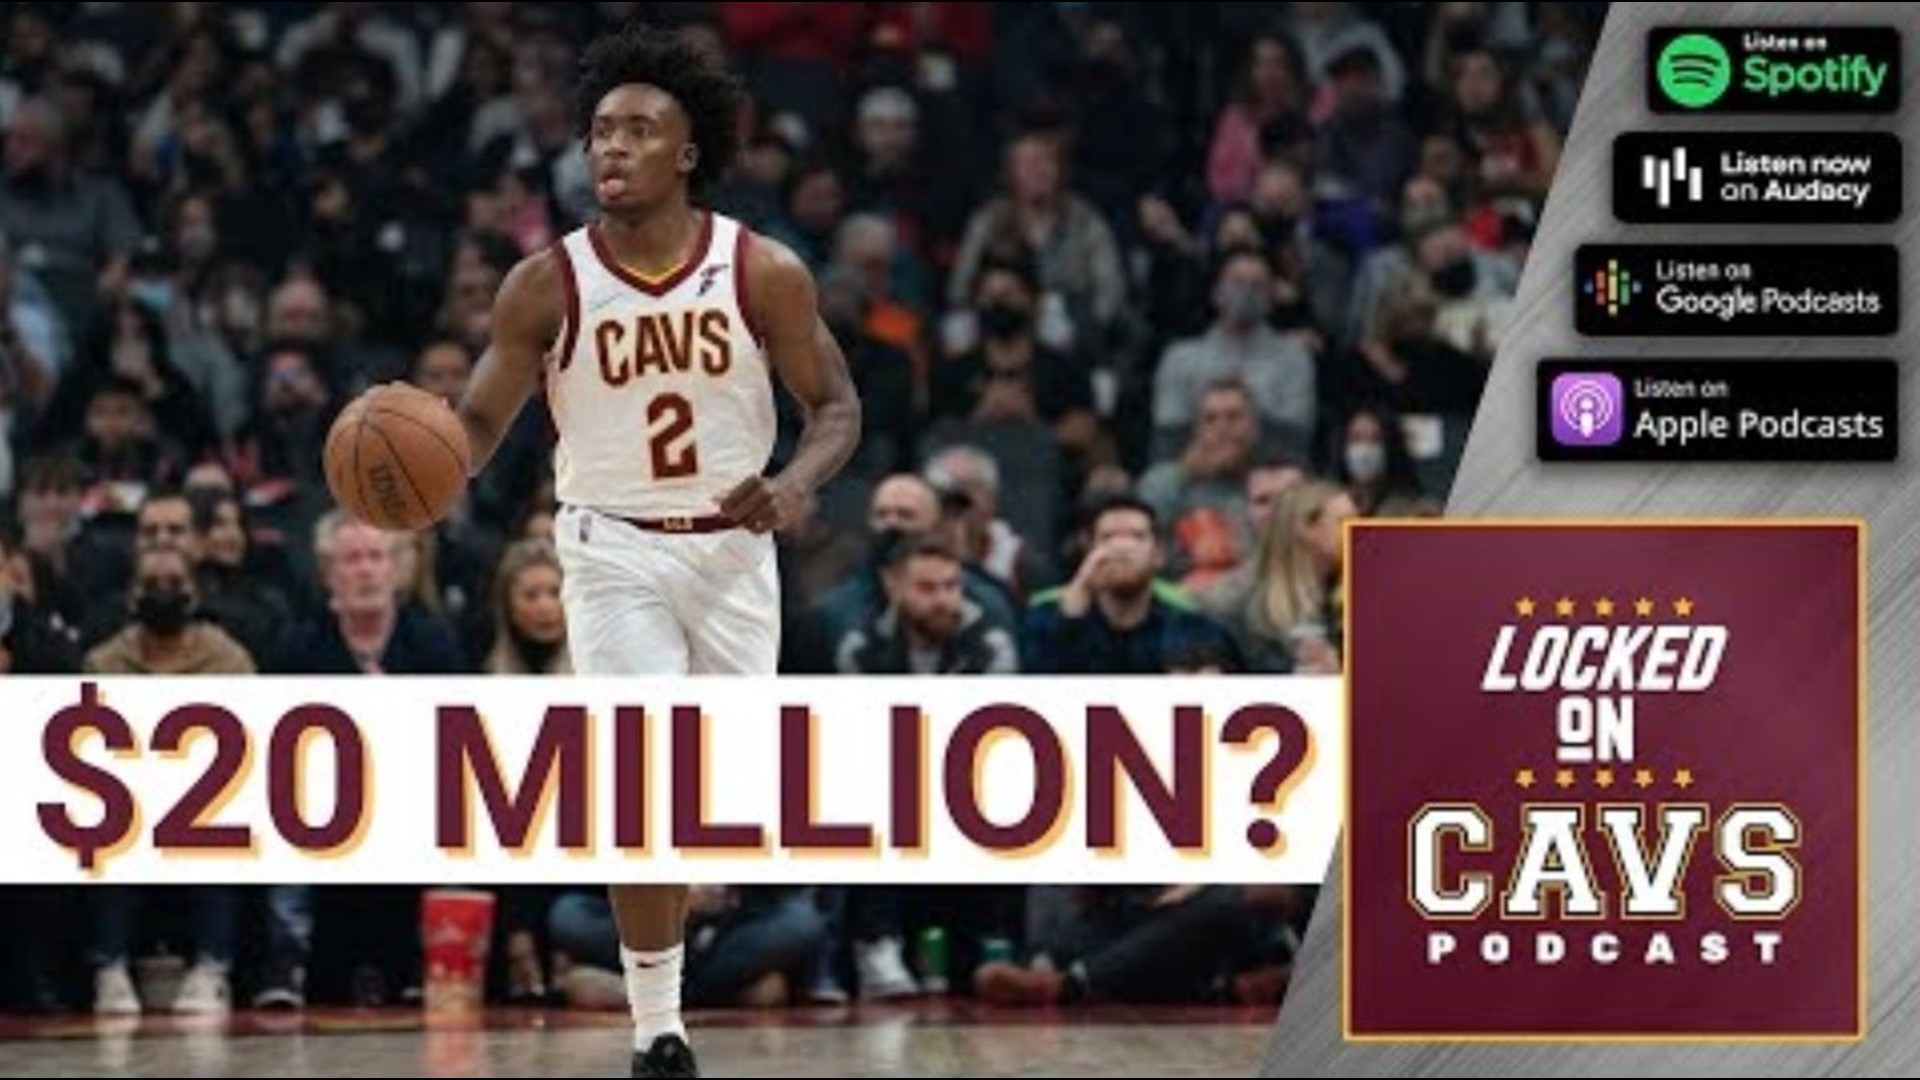 Chris Manning is joined by The Sporting News' Jordan Zirm to discuss Collin Sexton reportedly looking to get $20 million on the open market.